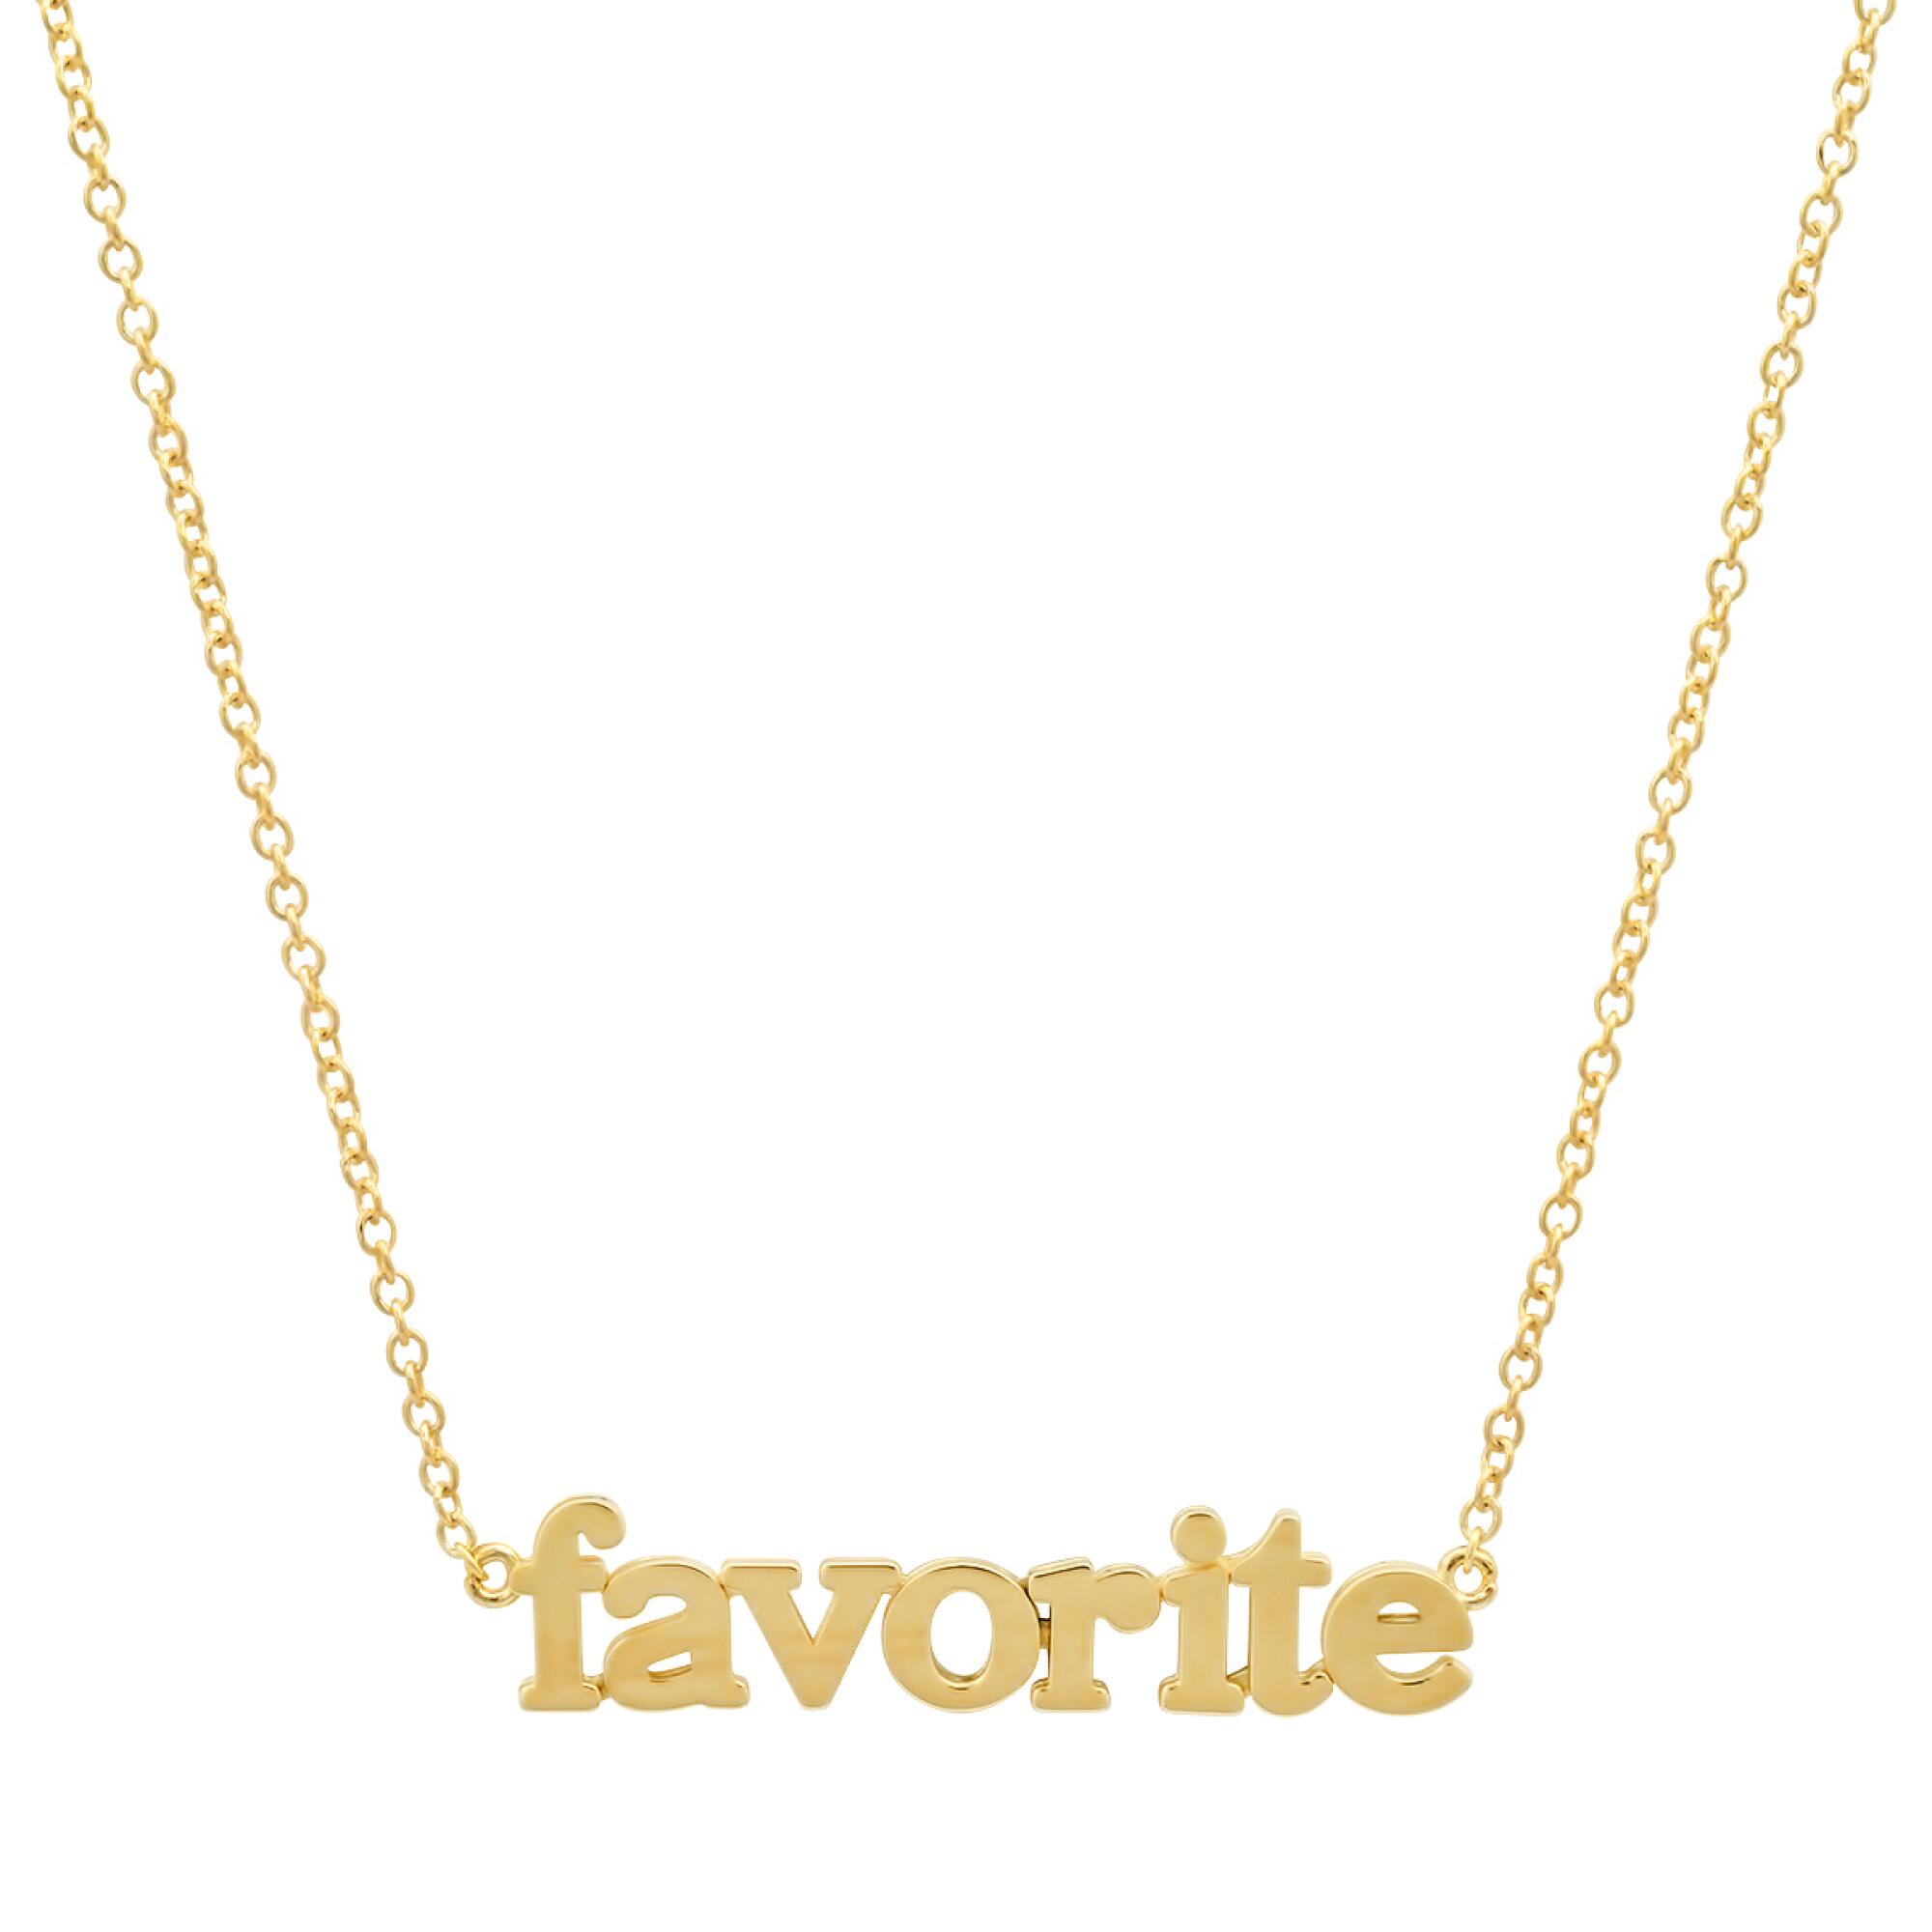 Necklace that reads "favorite"